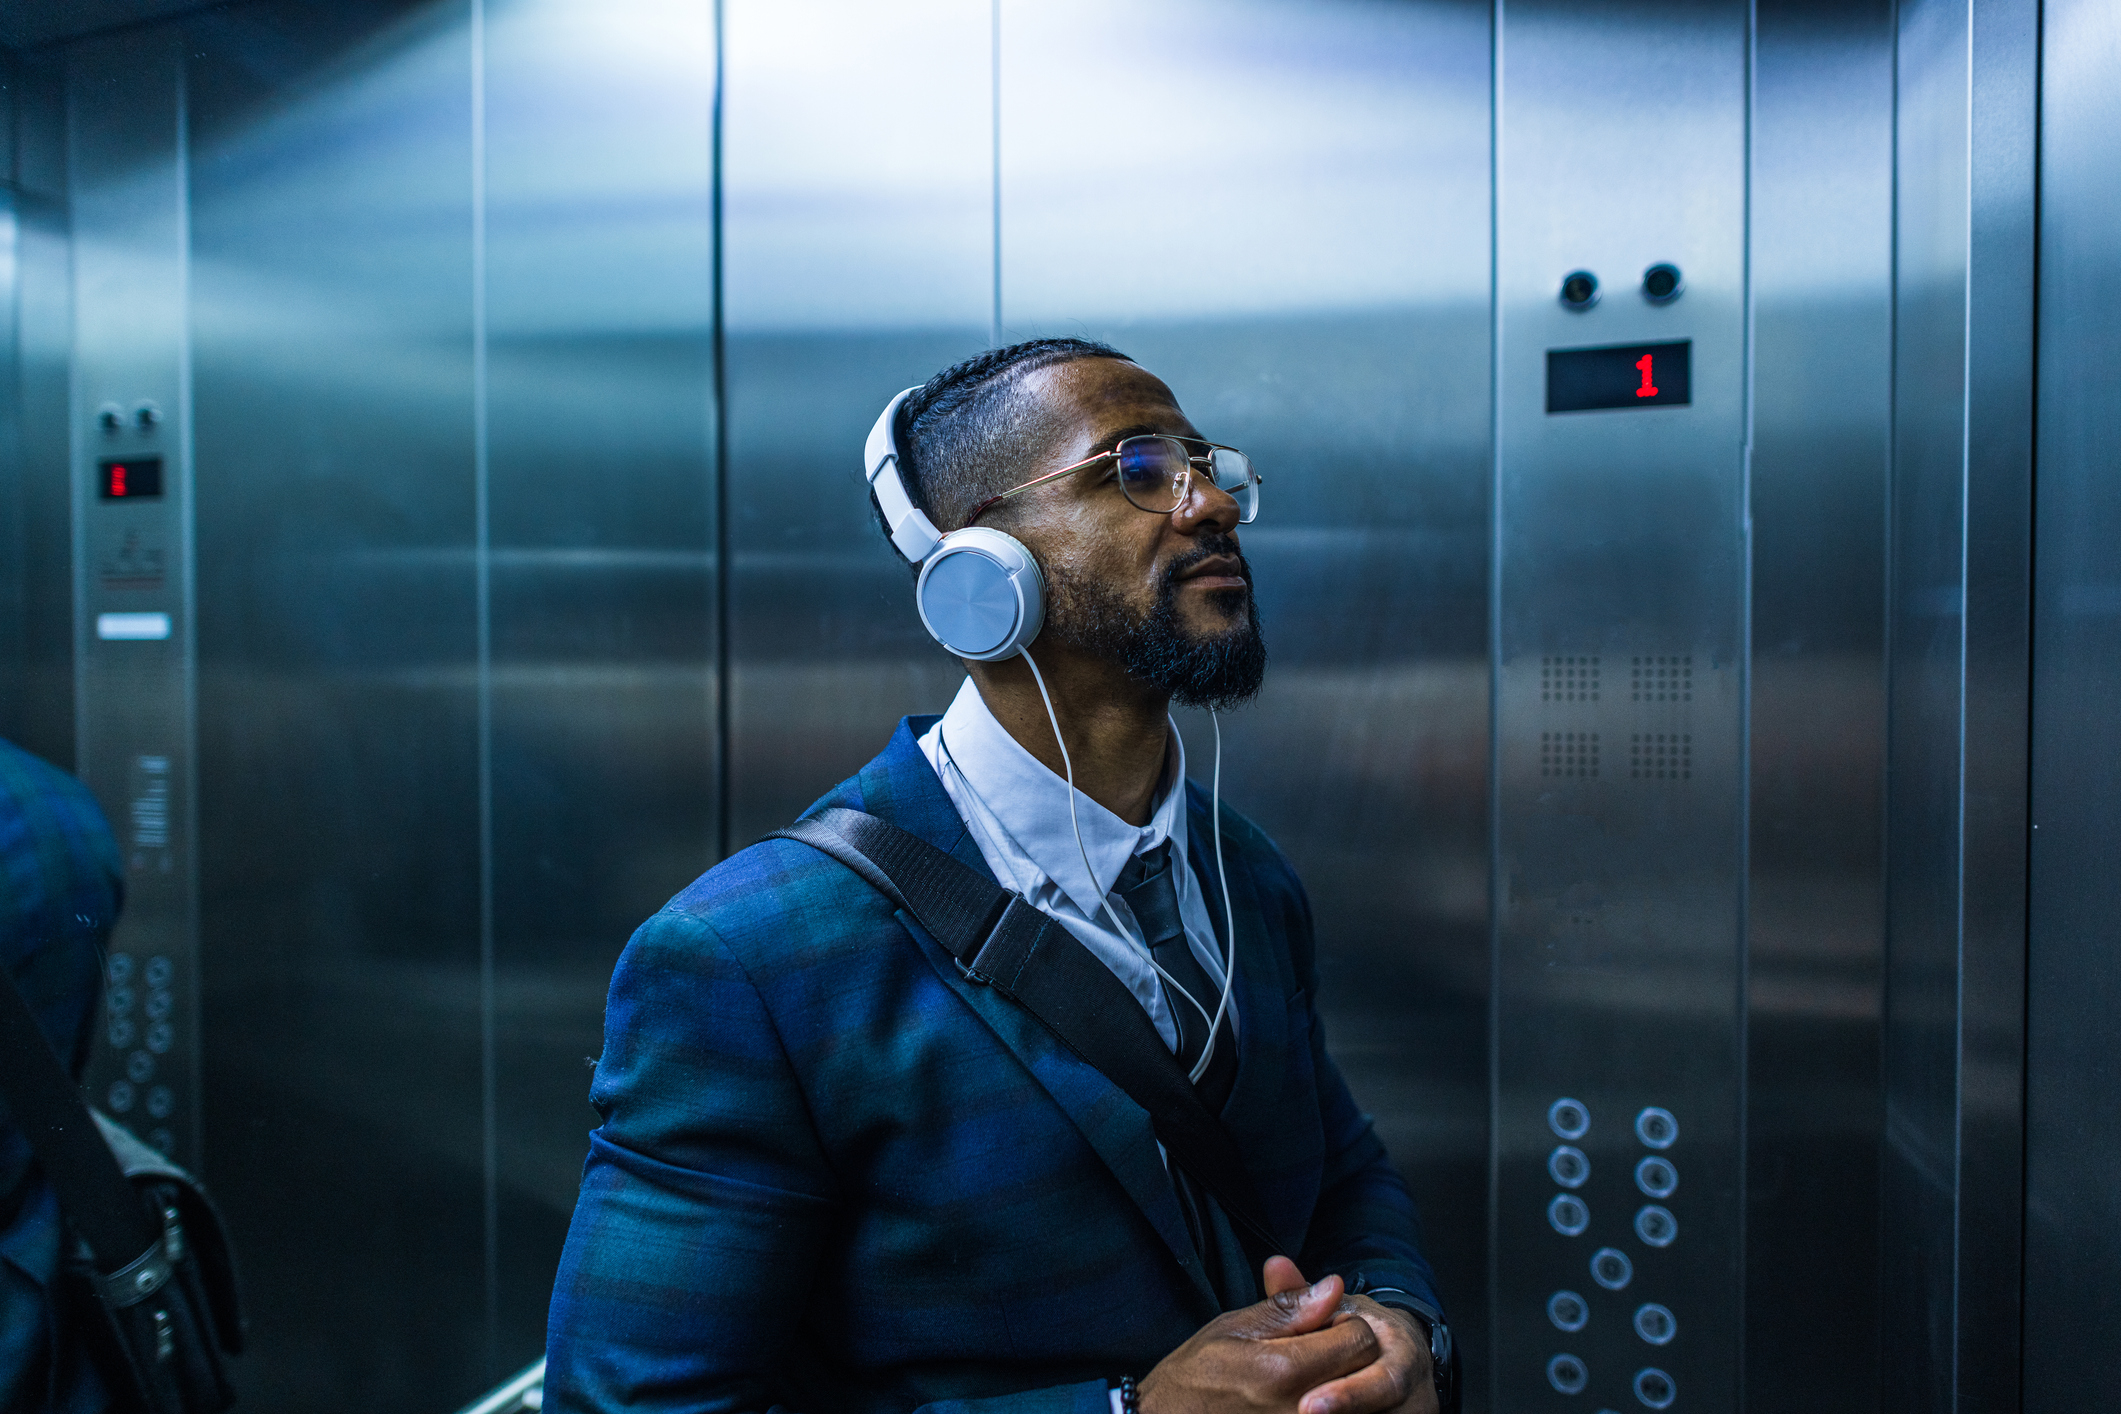 A man is listening to his headphones inside of an elevator